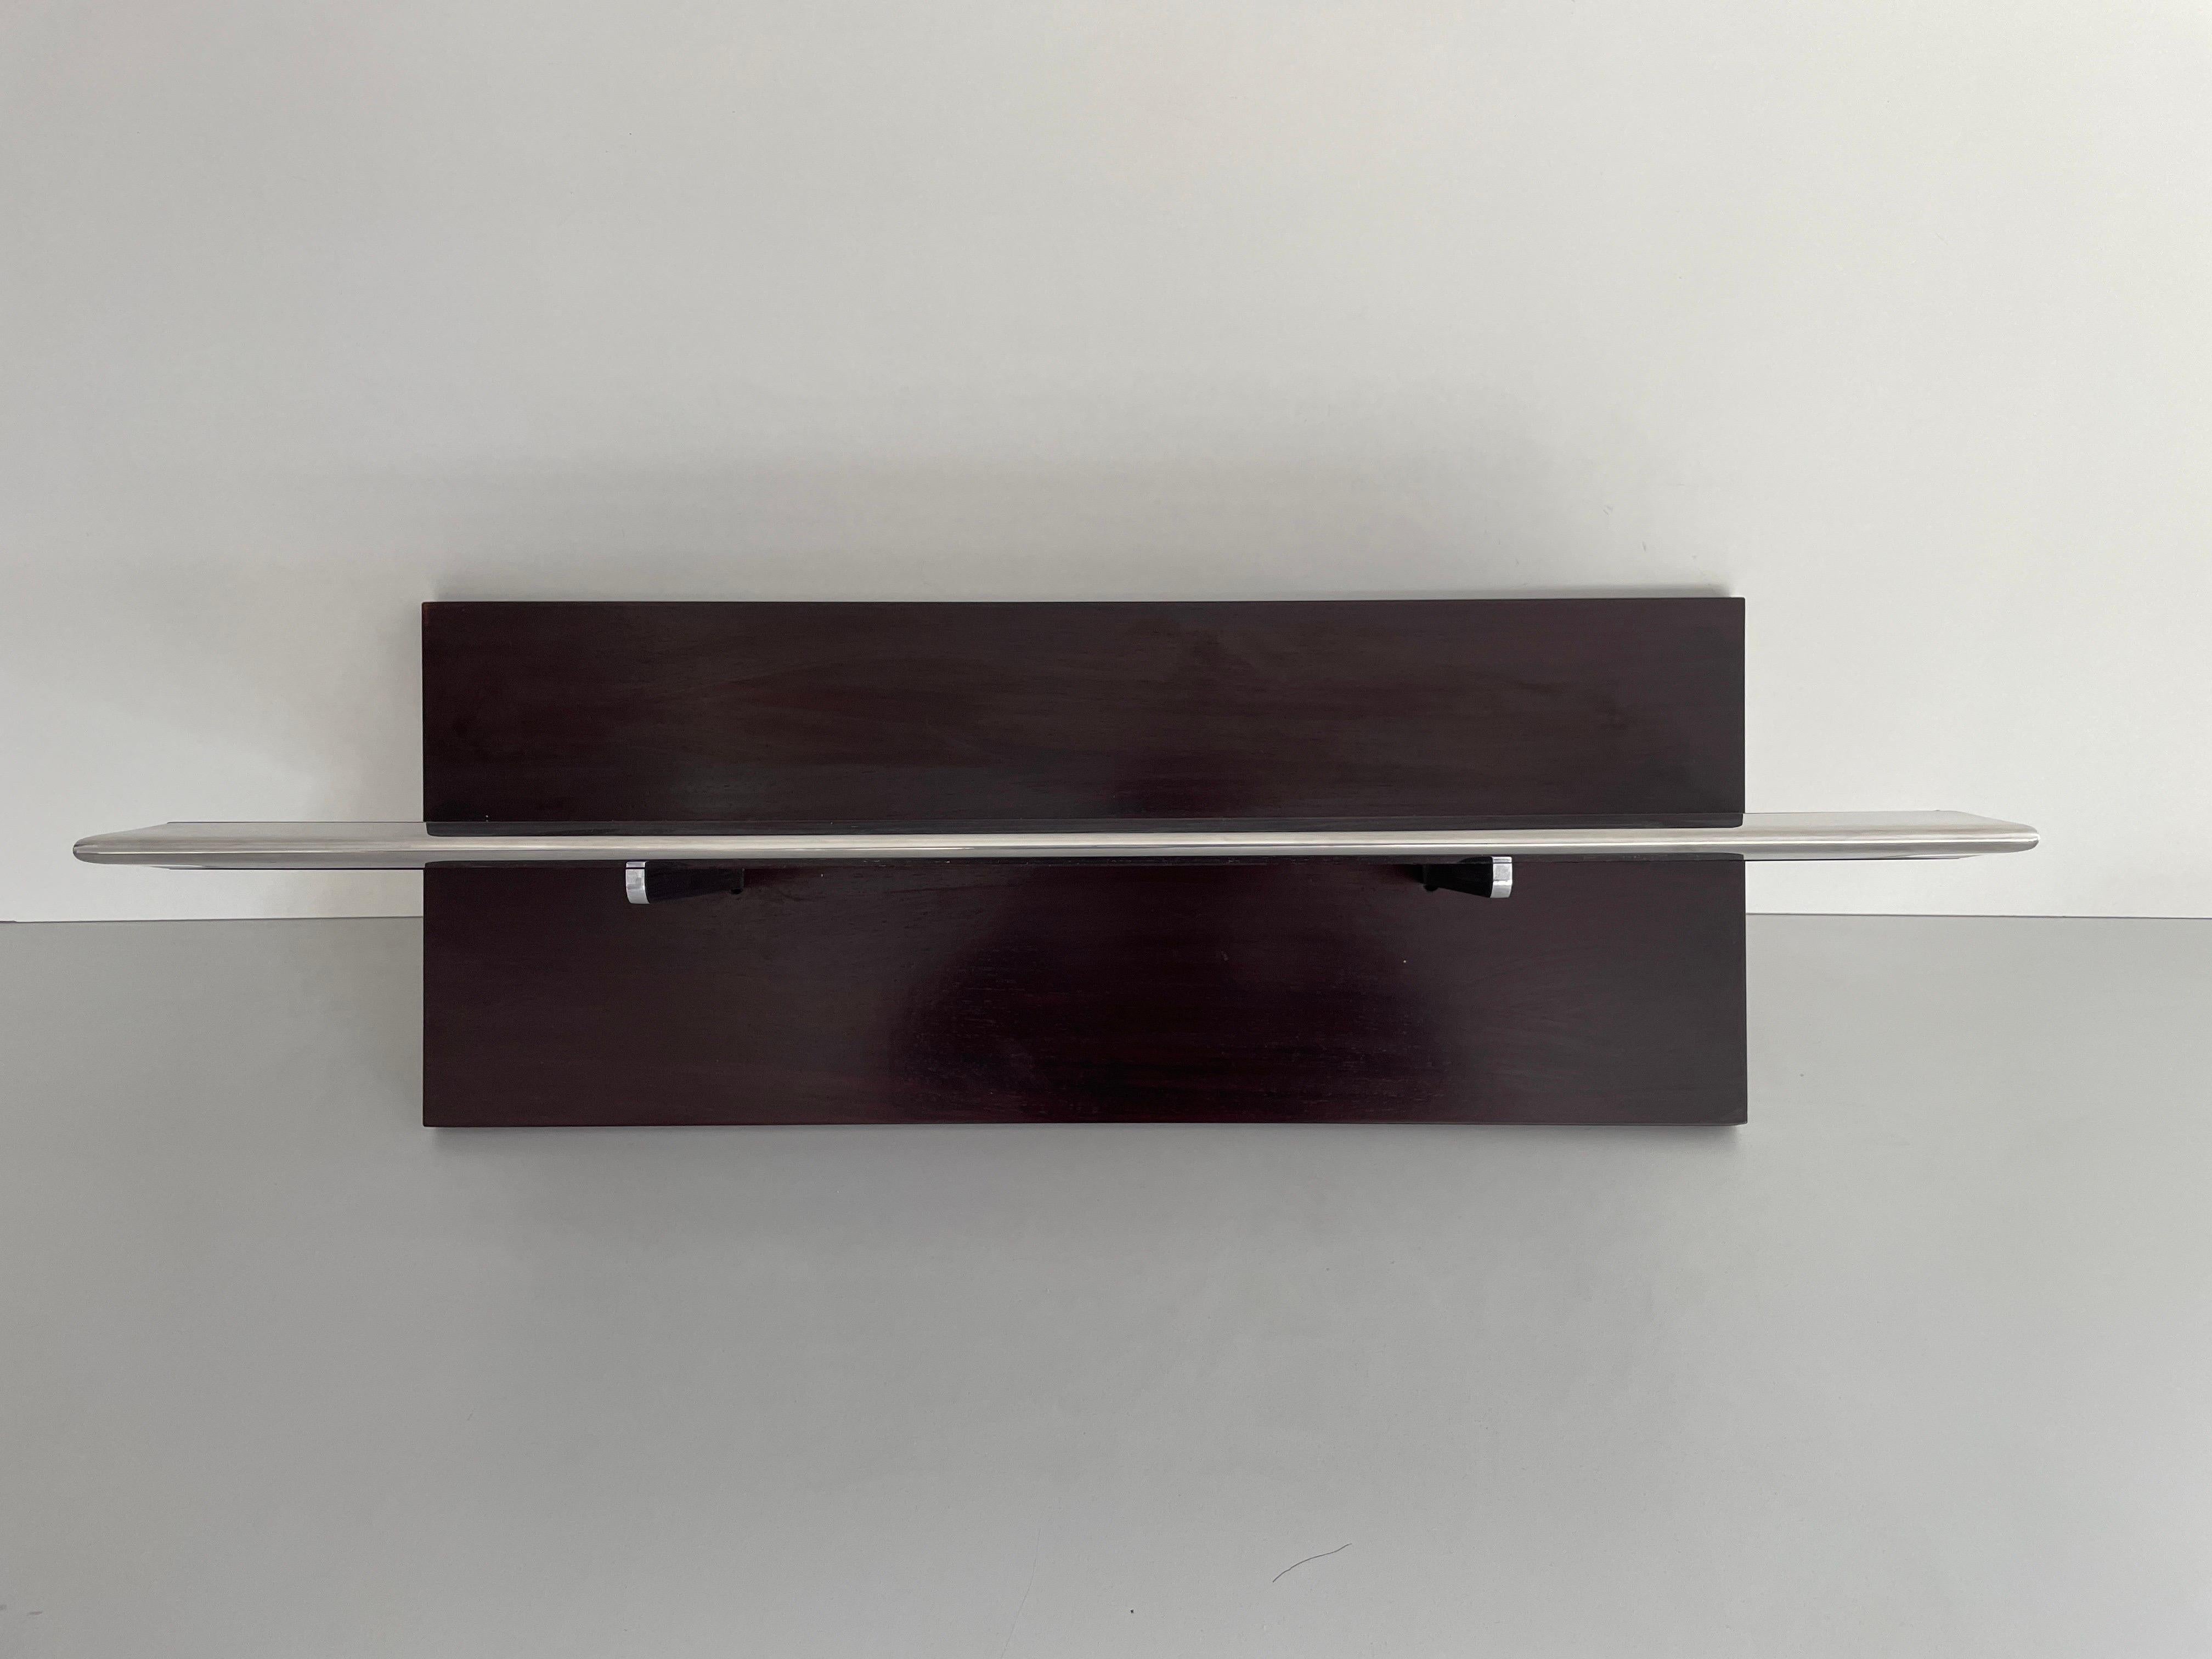 Mid-century Modern Rosewood Shelf with Steel Cover by Saporiti, 1960s, Italy

No damage, no crack.
Wear consistent with age and use.

Measurements: 
Height: 32 cm
Width: 70 cm
Depth: 28 cm